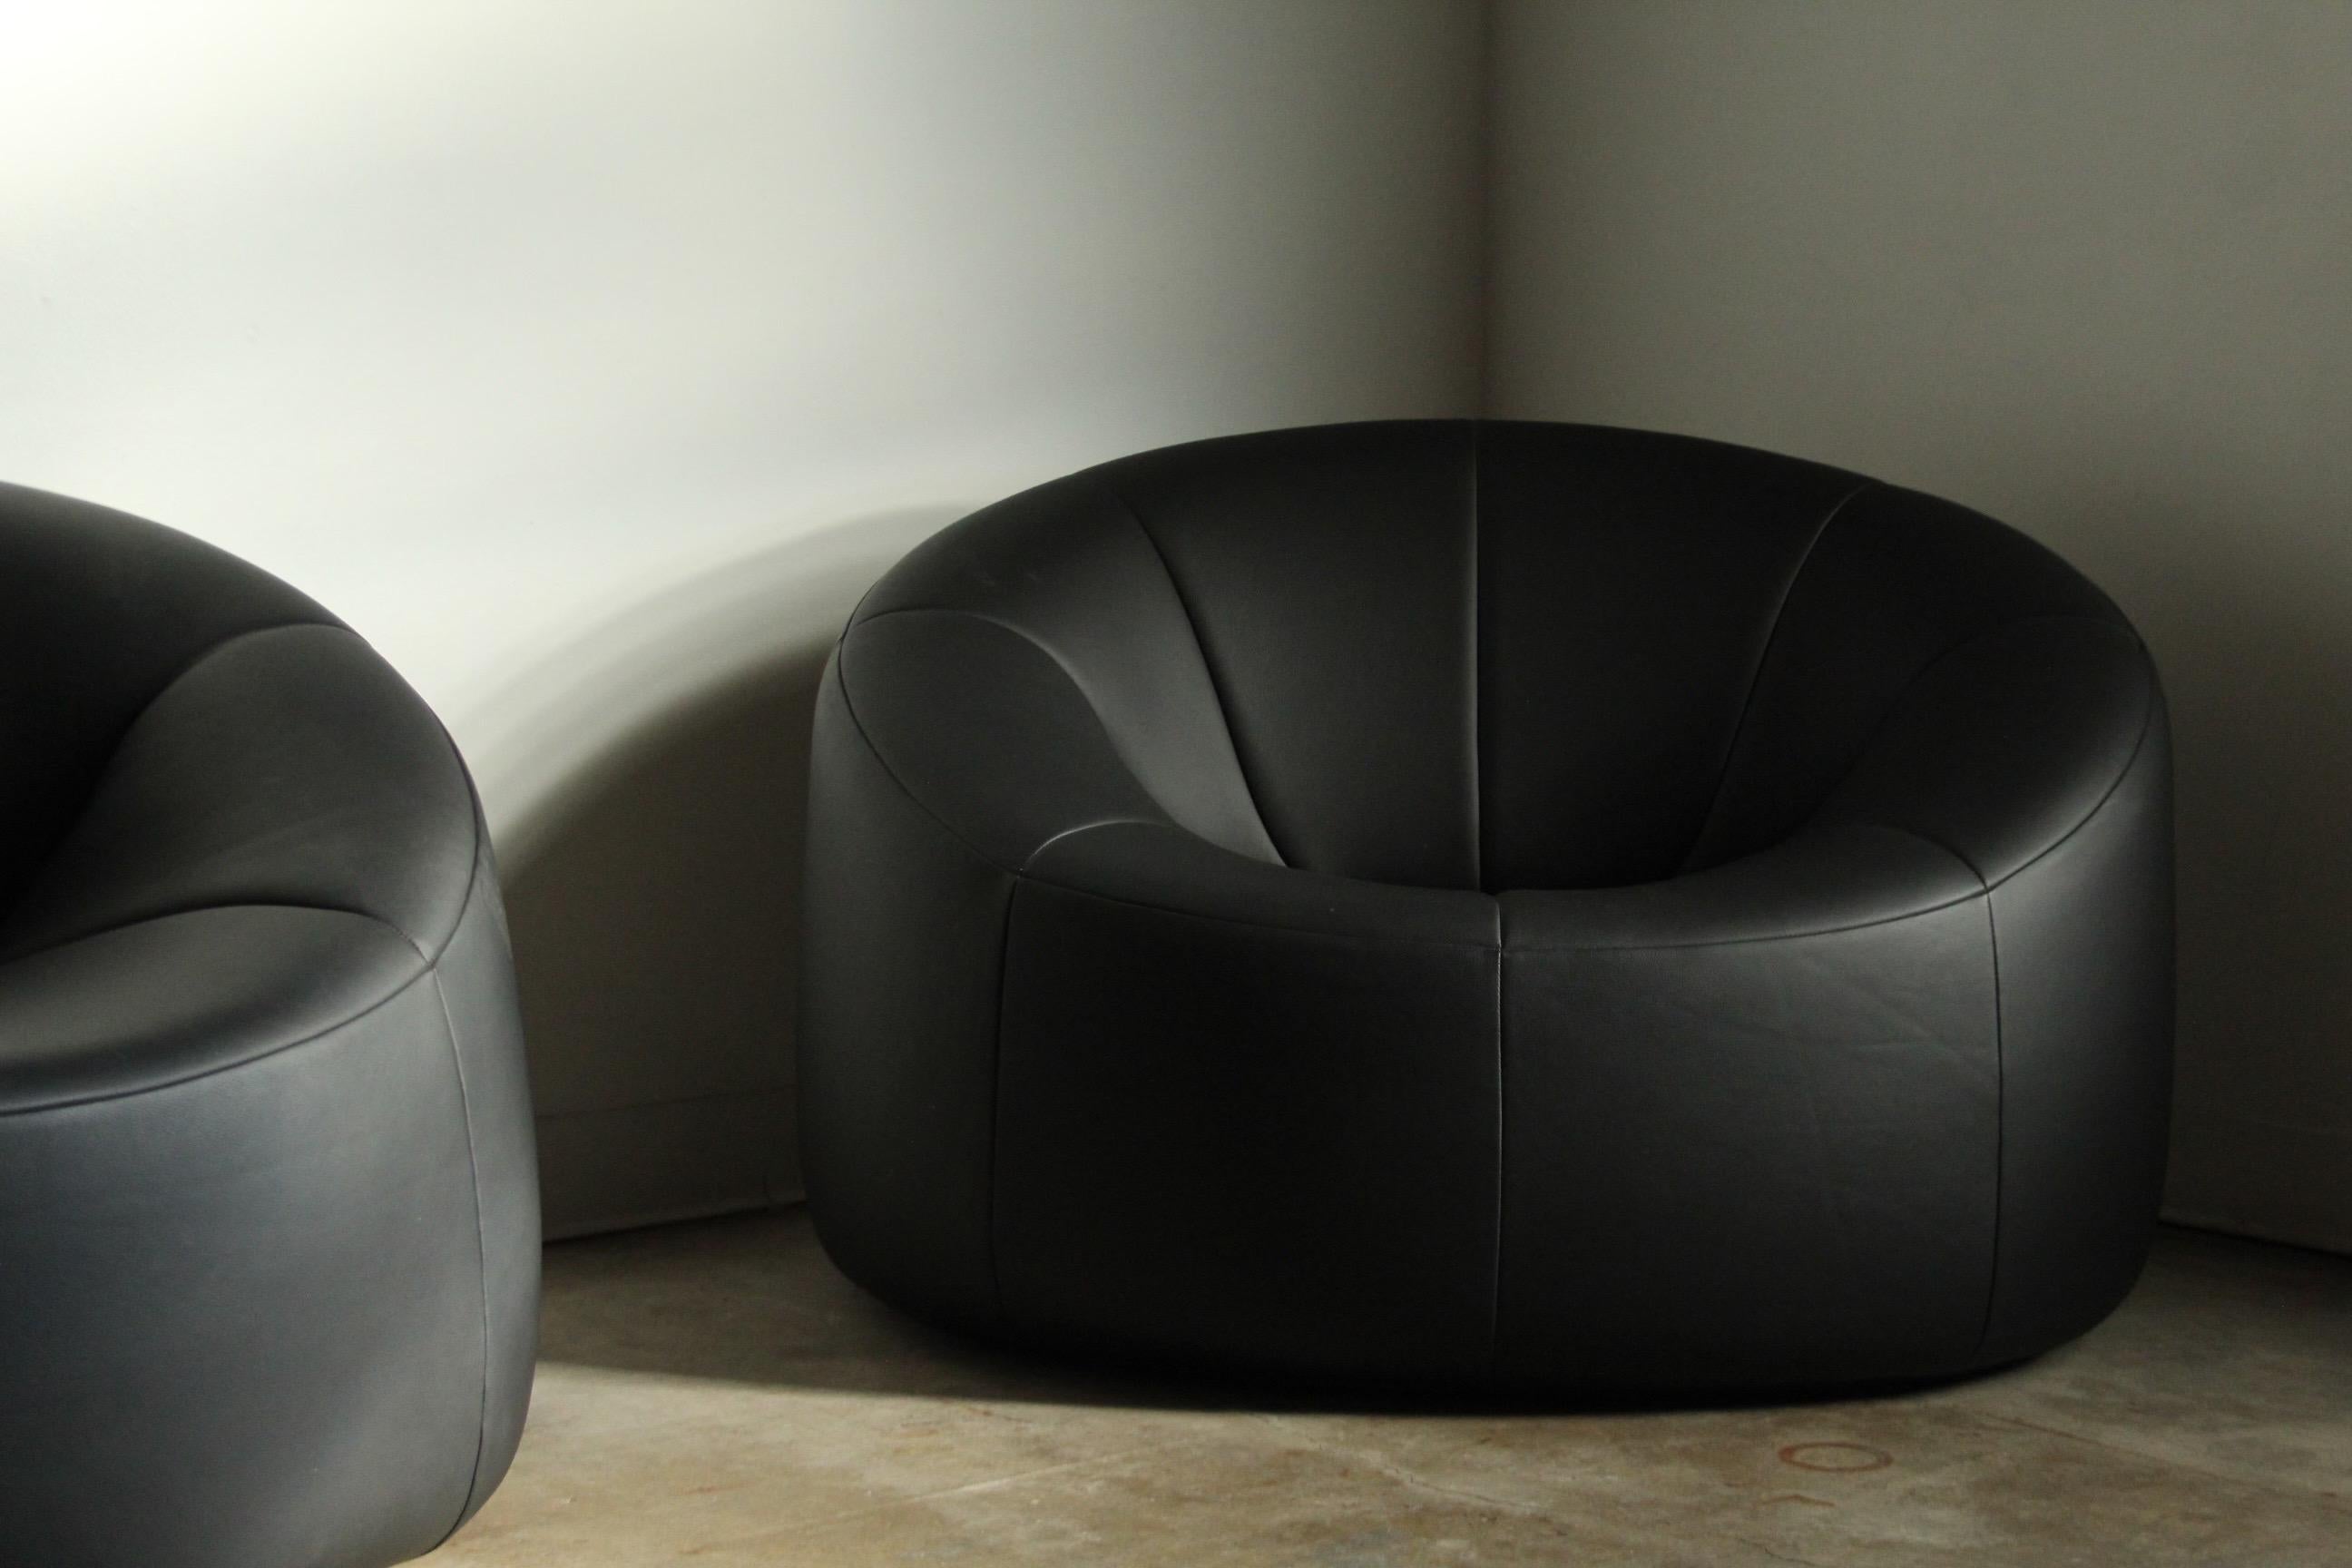 Mid-Century Modern Pierre Paulin Black Leather Pumpkin Lounge Chairs for Ligne Roset, 2000s For Sale